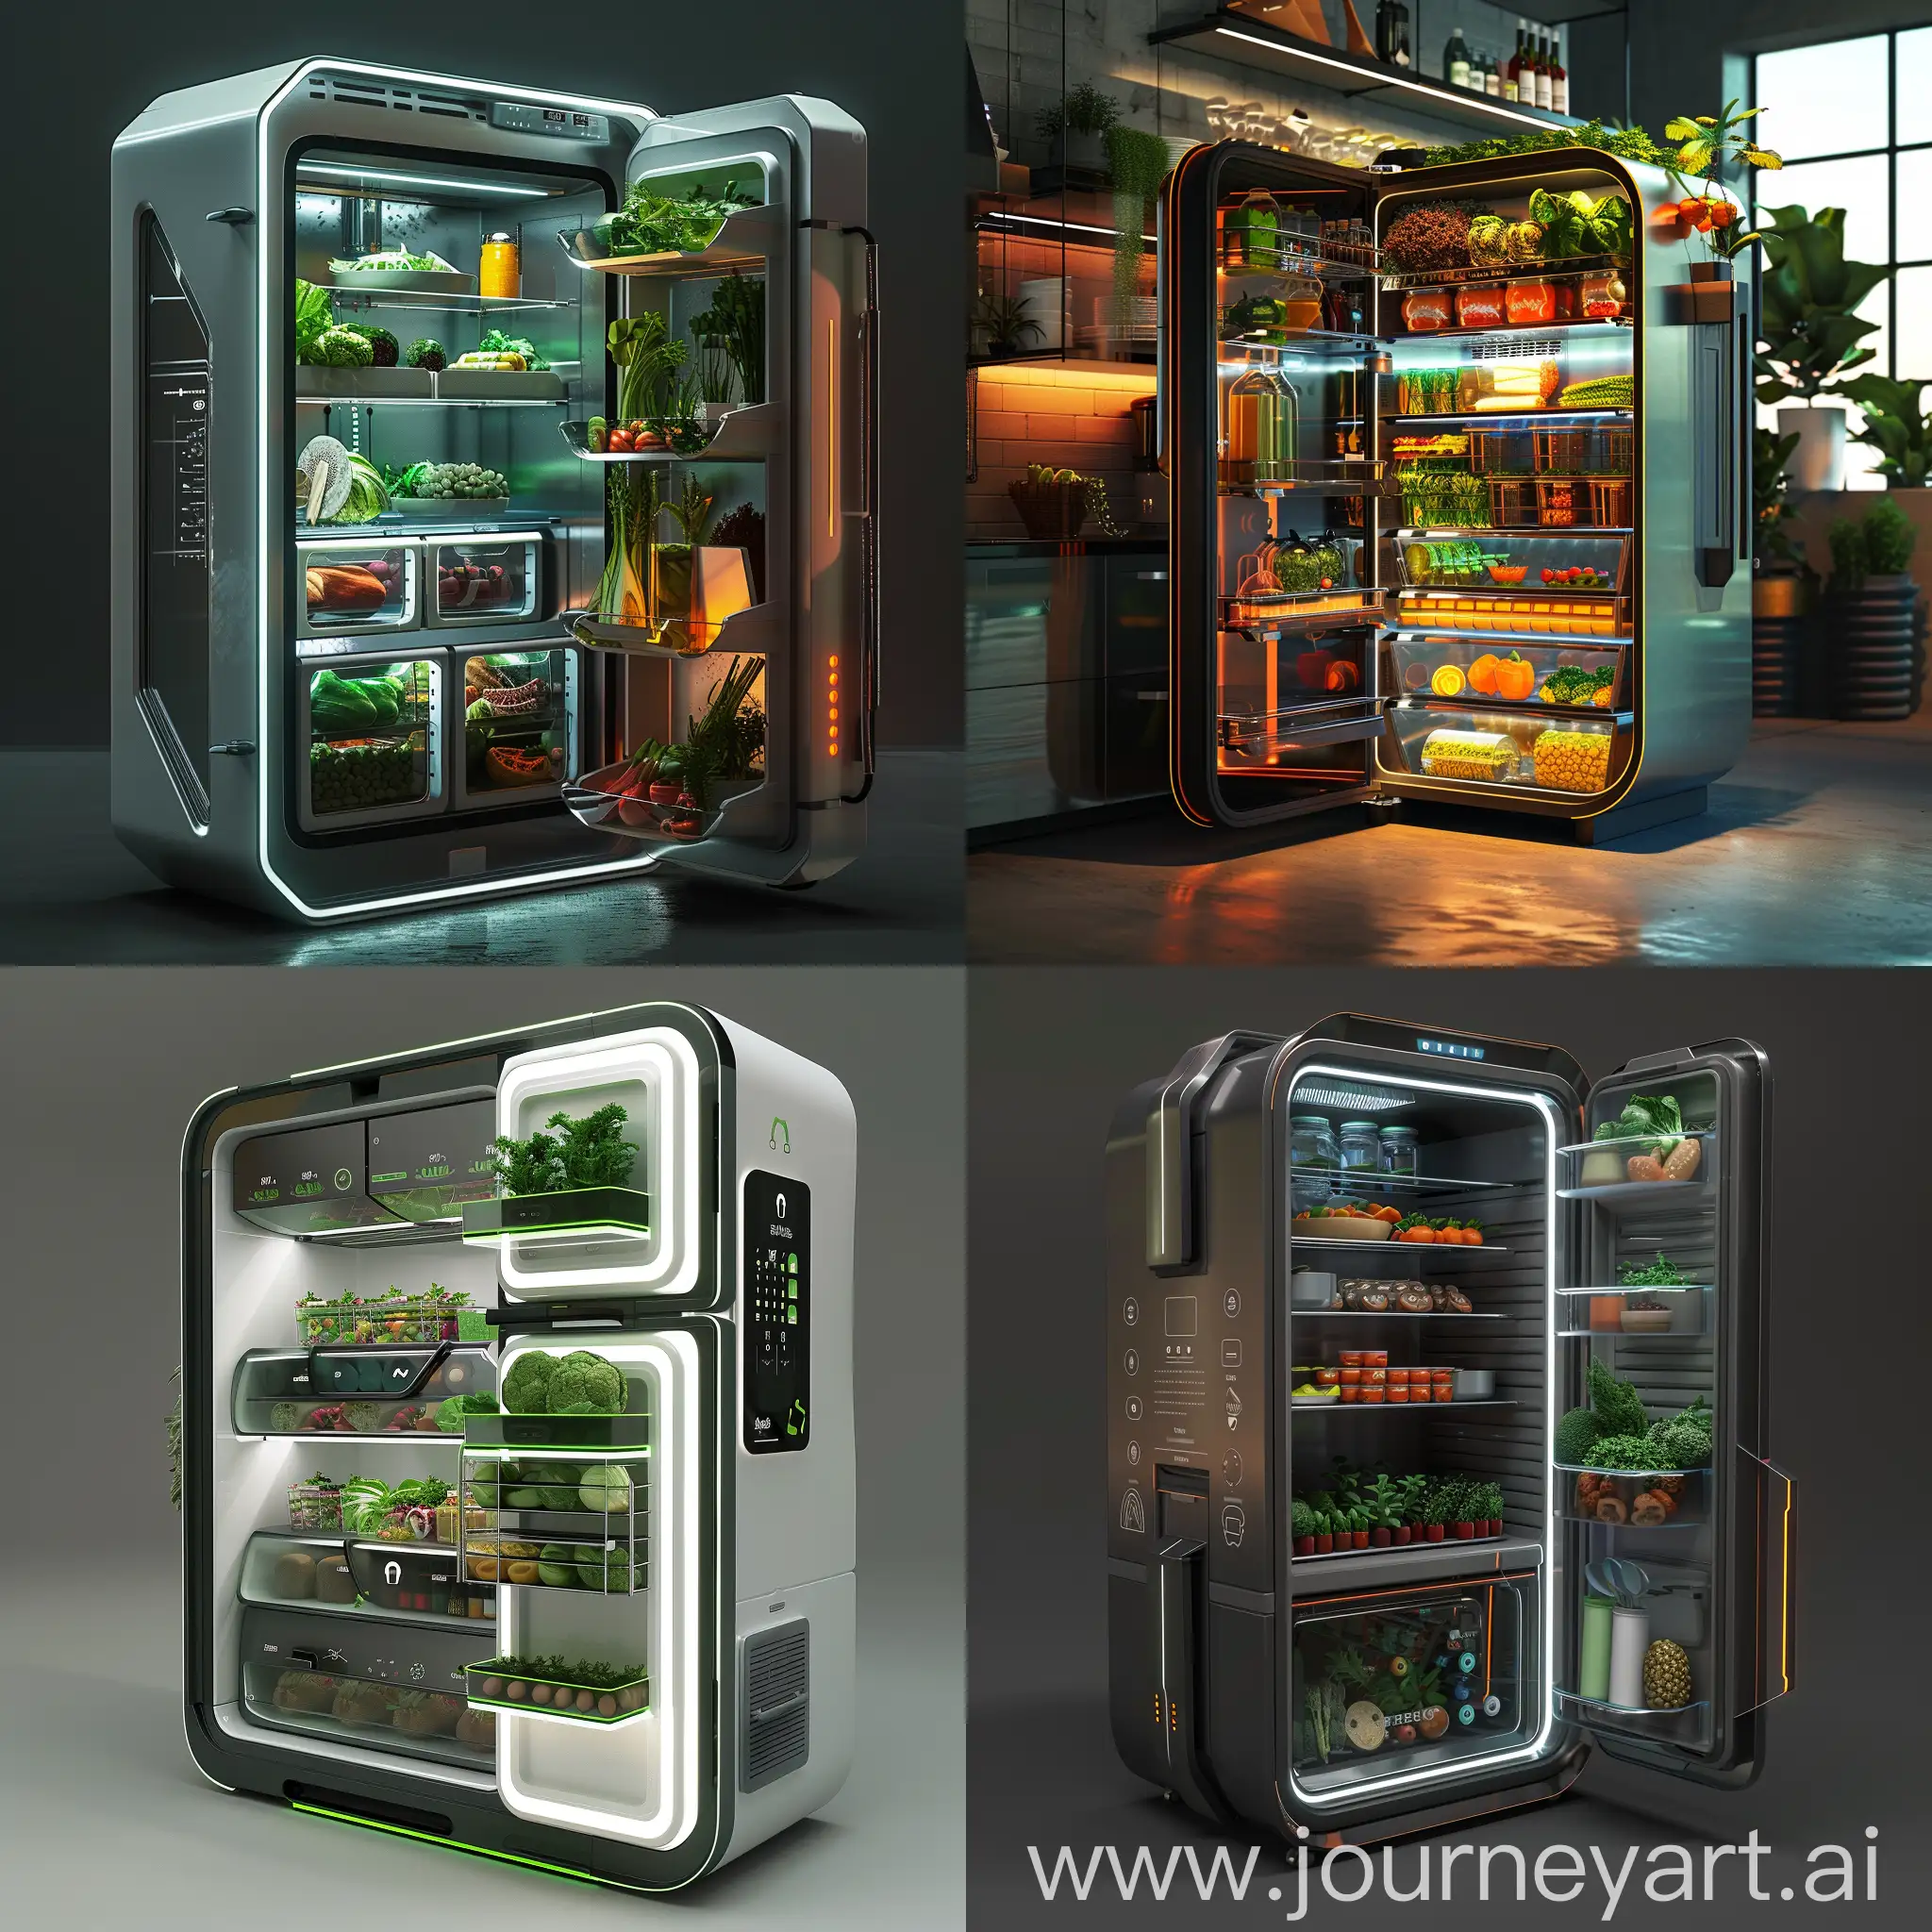 Futuristic-Living-Fridge-with-Robotic-Chef-Assistant-and-Virtual-Reality-Meal-Planning